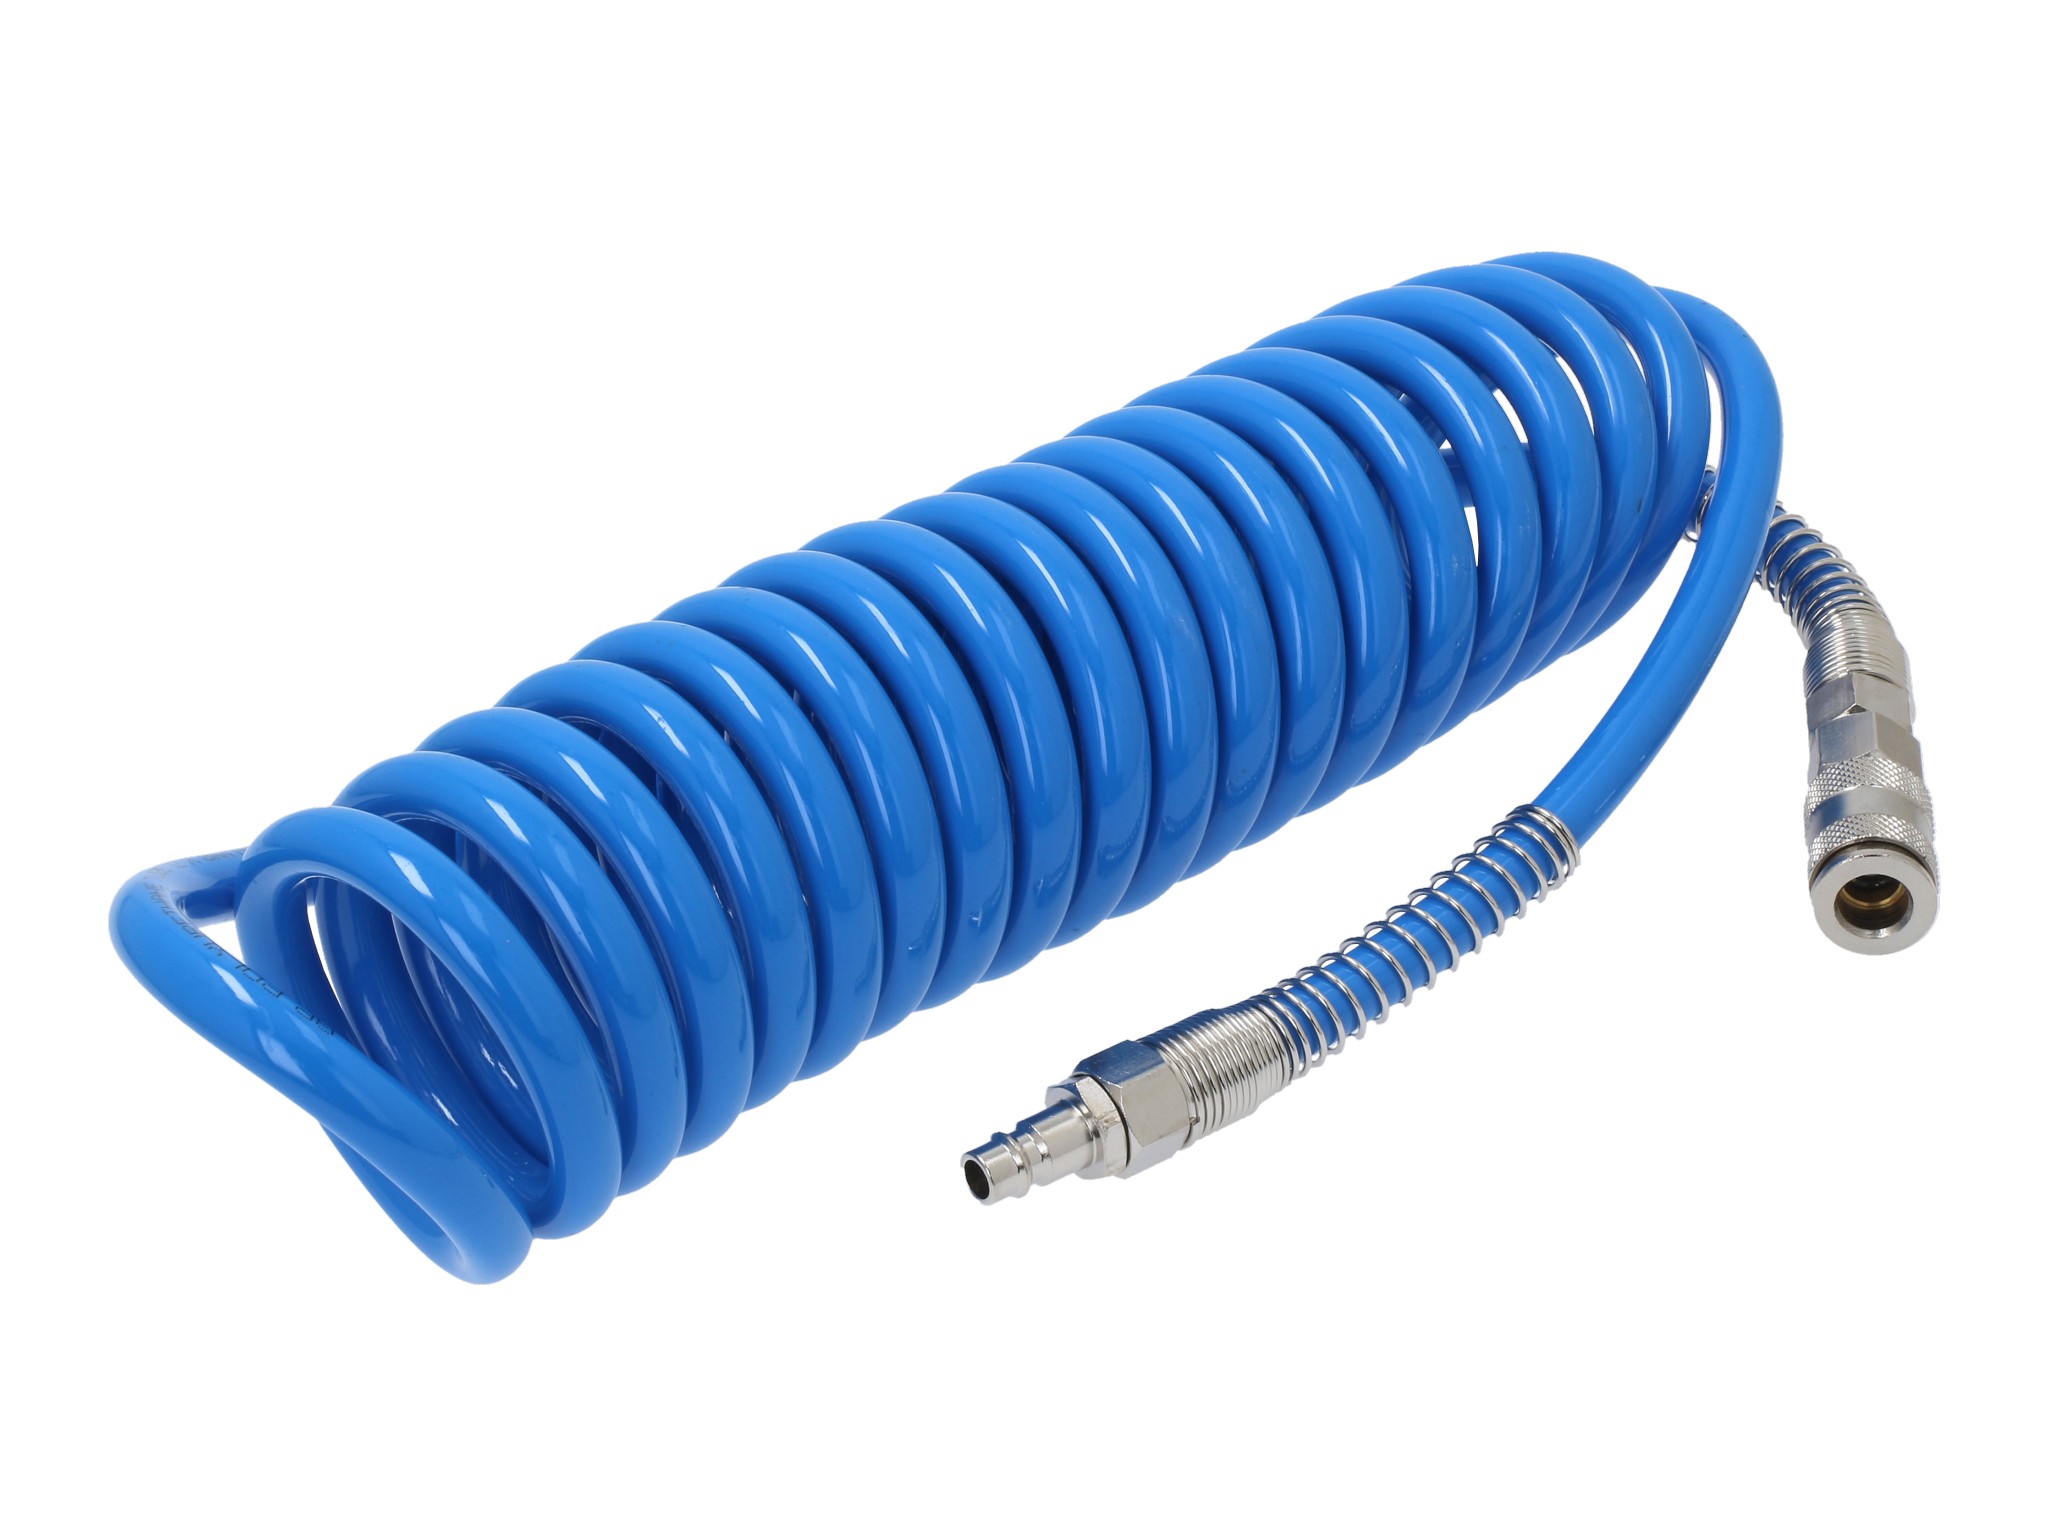 Pneumatic hoses for industrial and automation applications